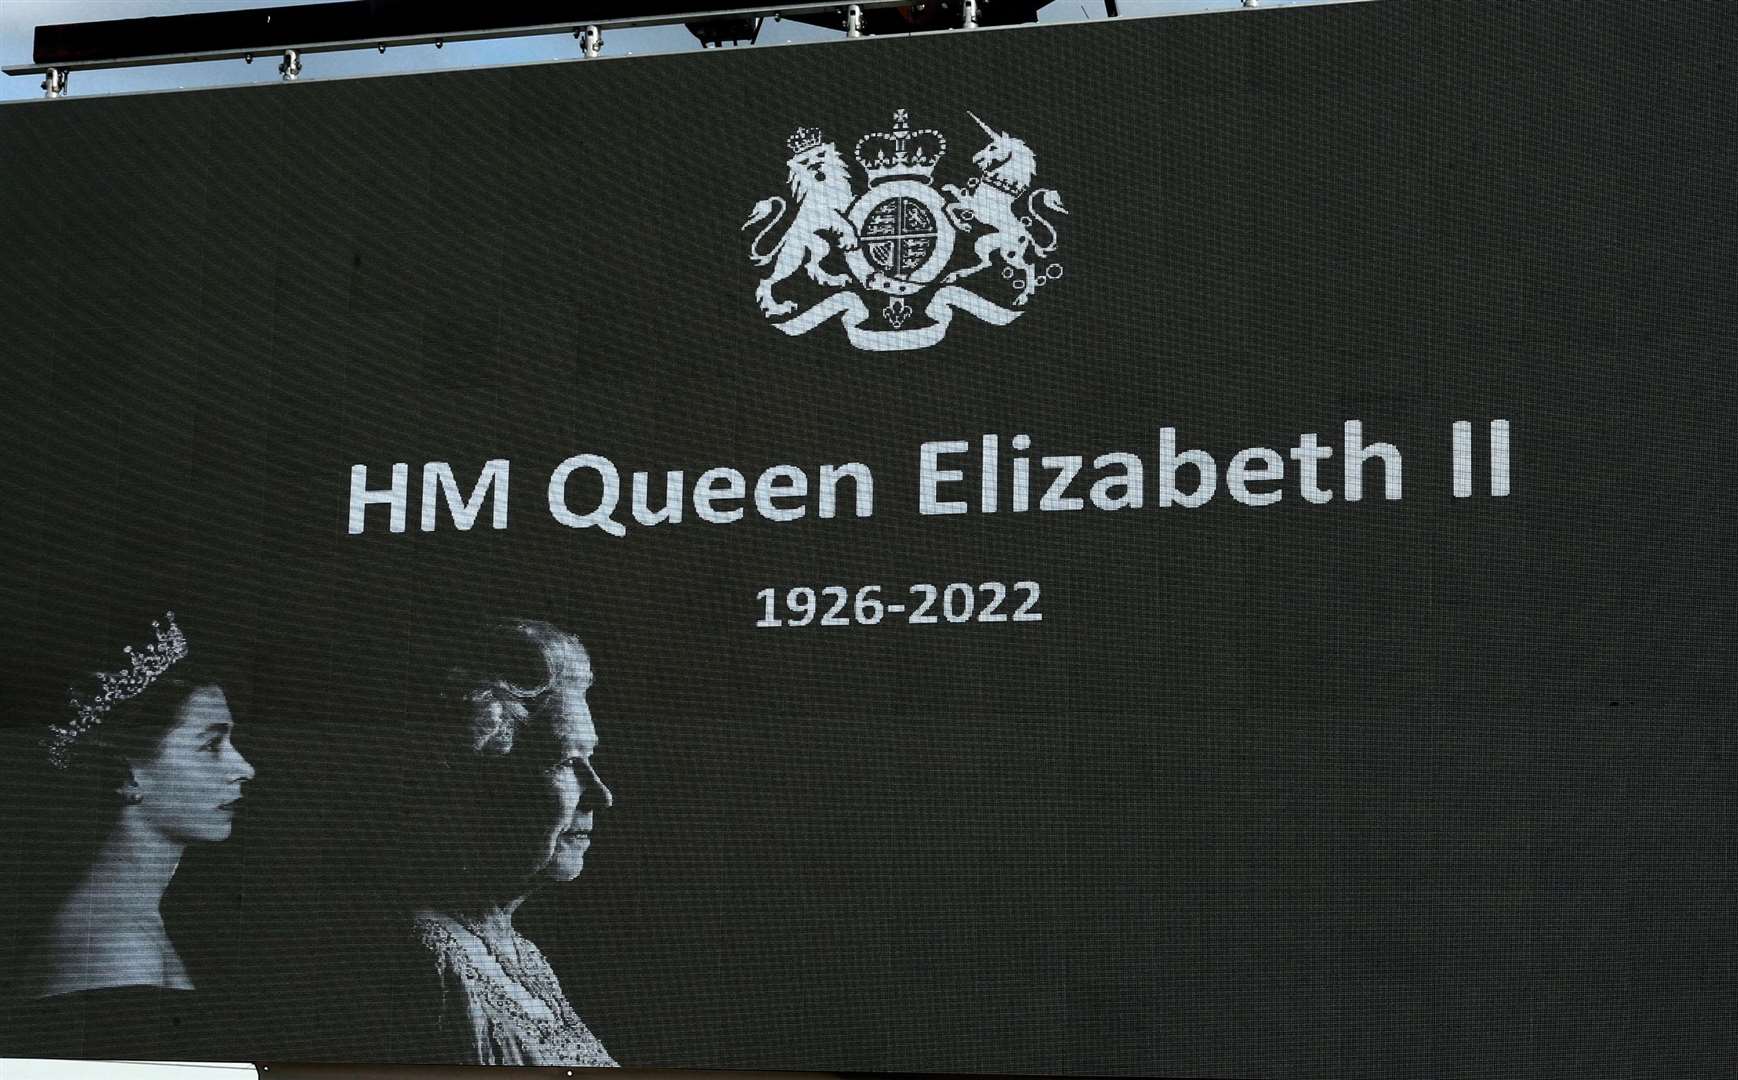 Images of the Queen were displayed on a big screen. Picture: Community Cohesion